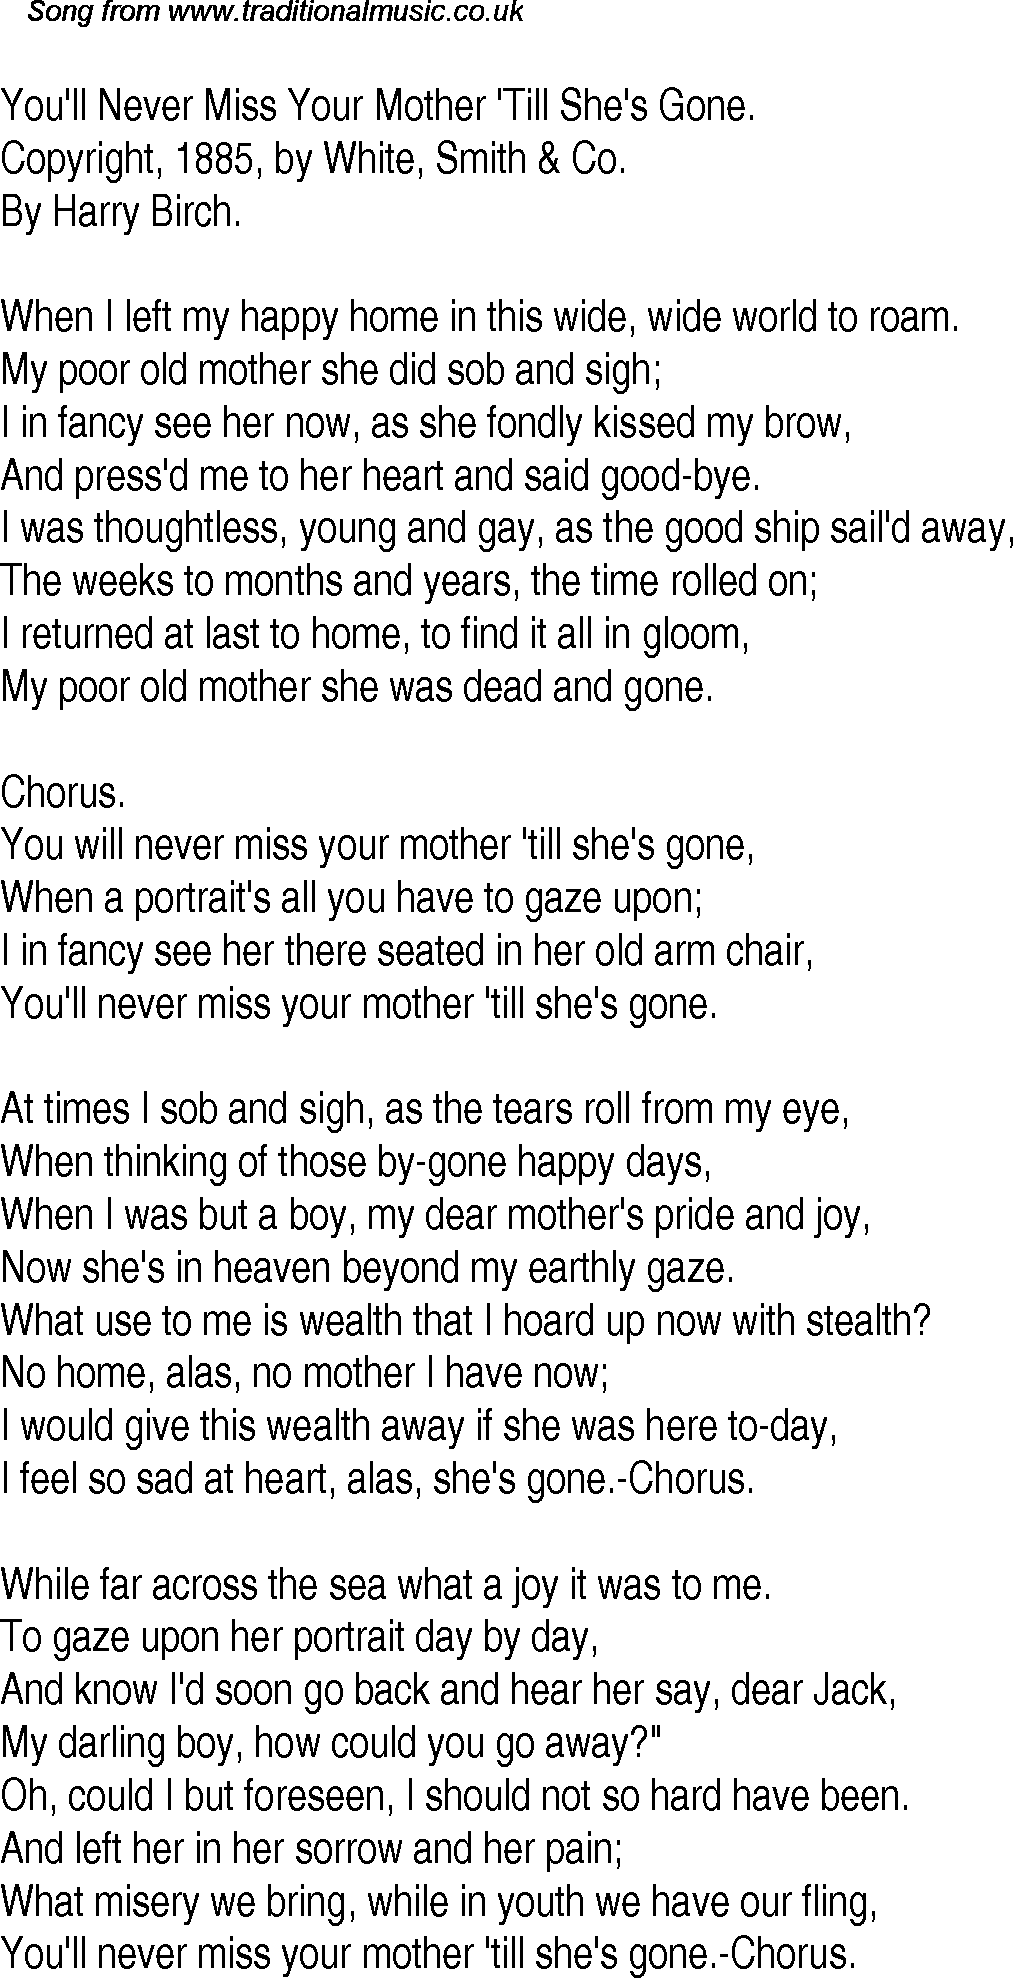 Old Time Song Lyrics for 12 Youll Never Miss Your Mother Till Shes Gone